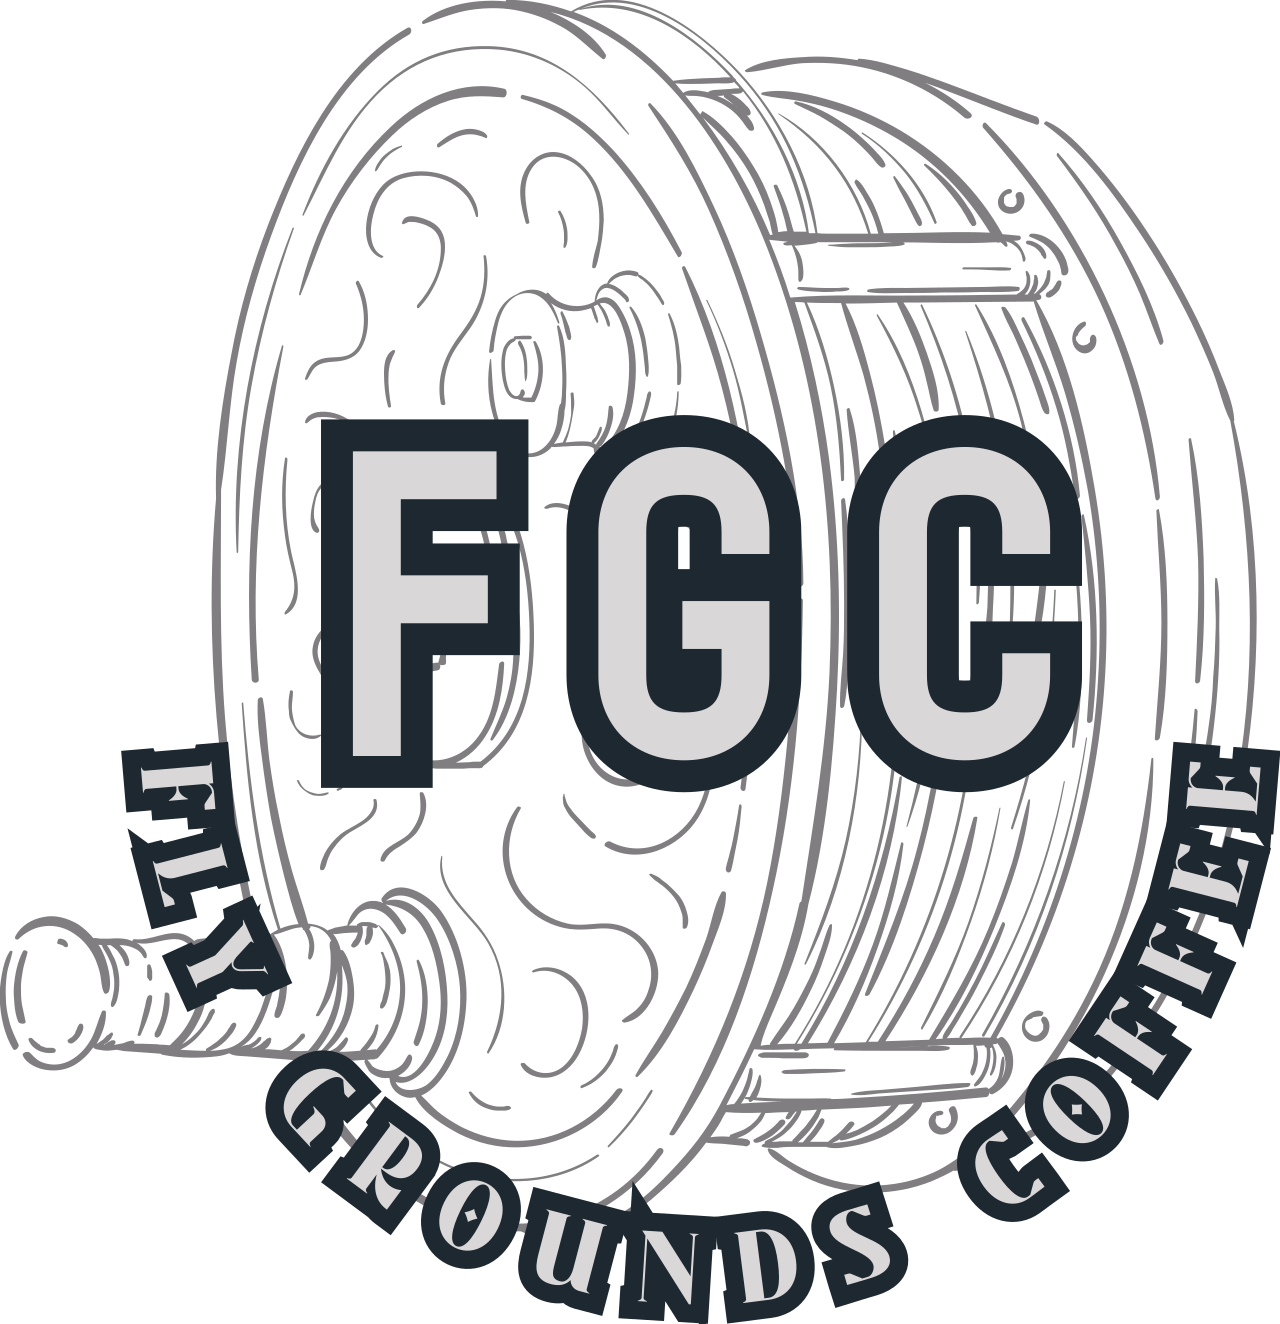 FLY GROUNDS COFFEE's logo